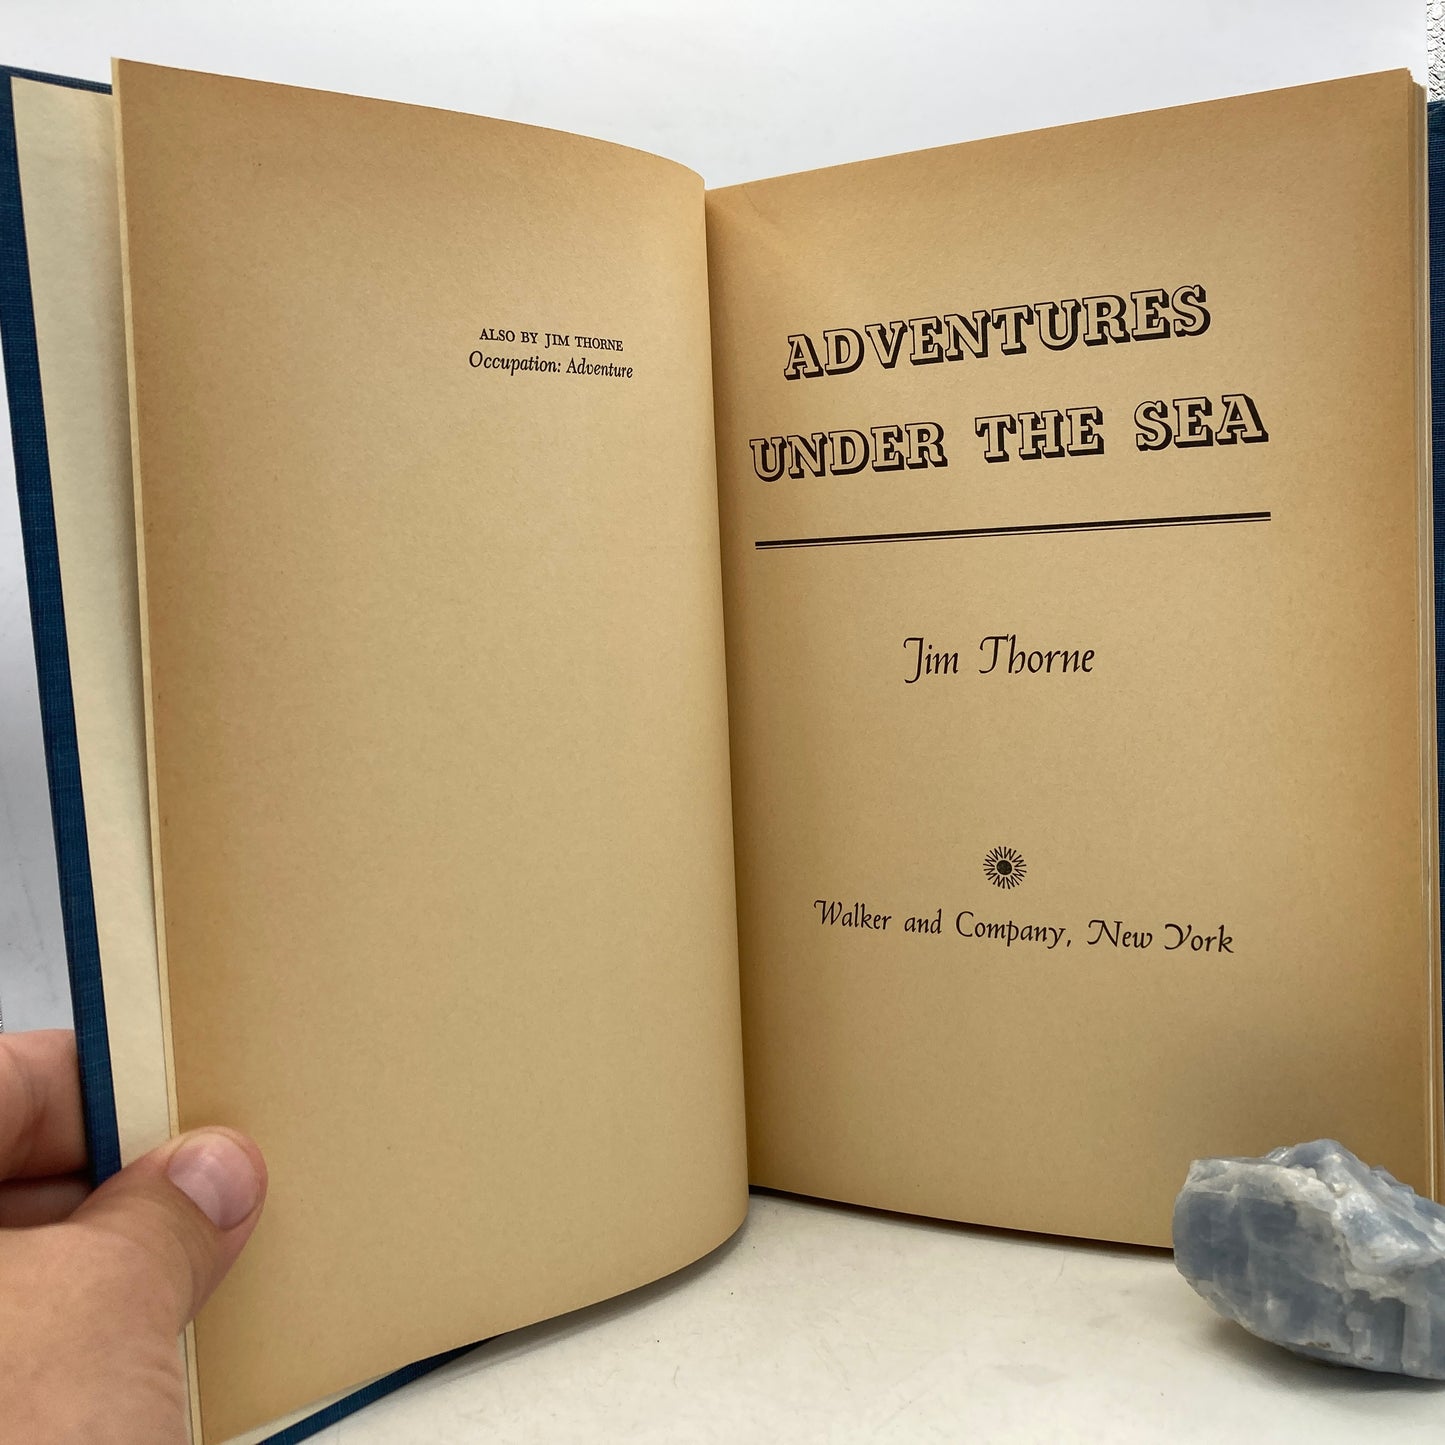 THORNE, Jim "Adventures Under the Sea" [Walker and Company, 1965]